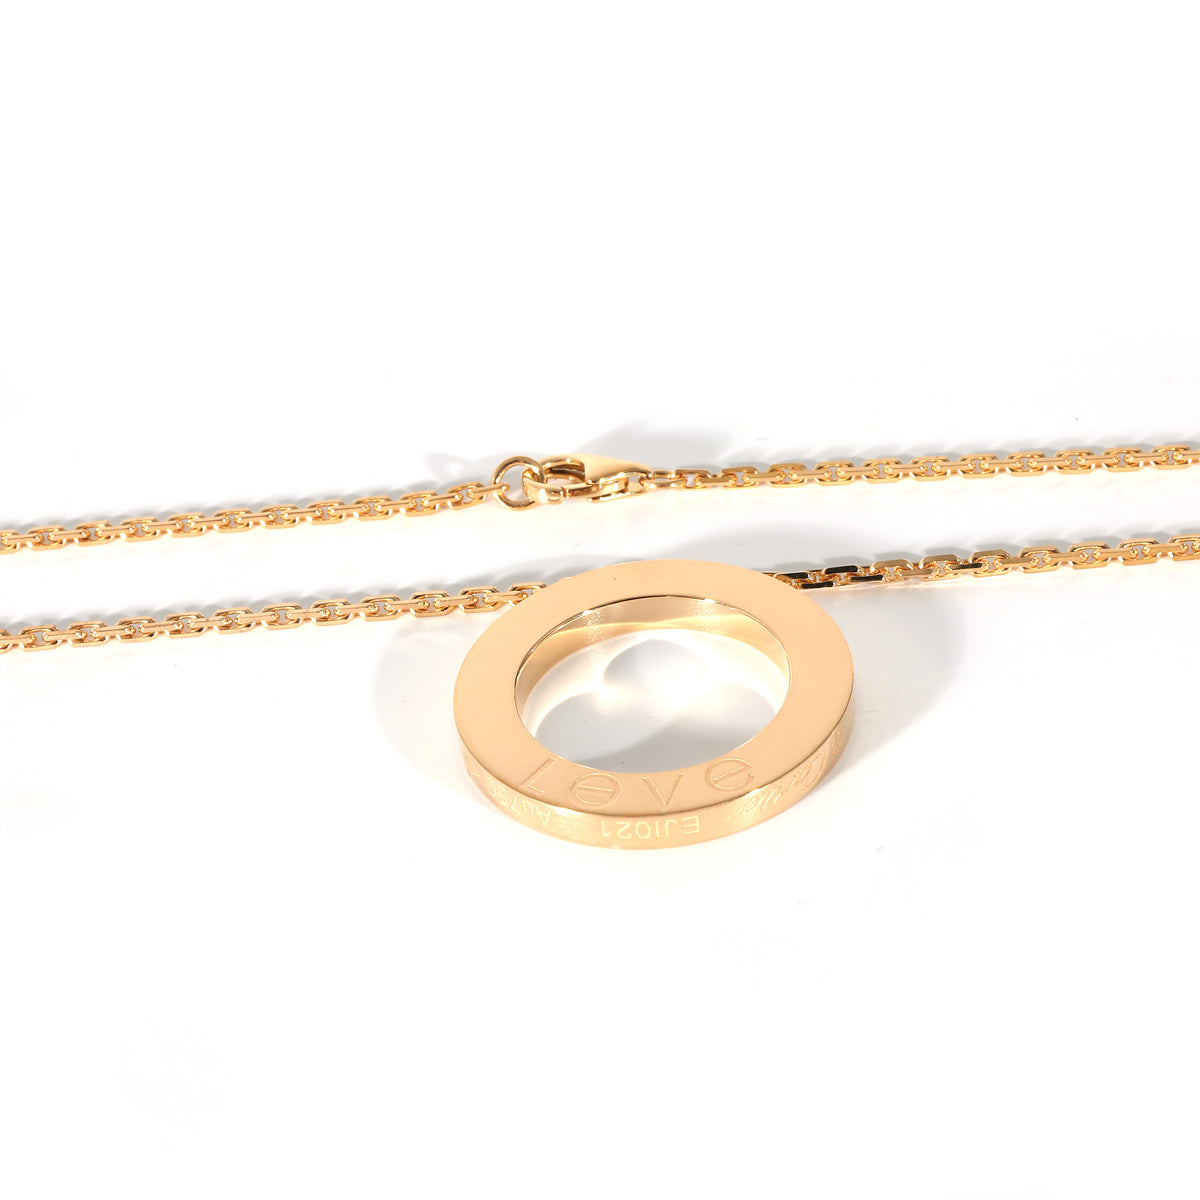 Cartier Love Circle Necklace in 18k Yellow Gold 0.08 CTW